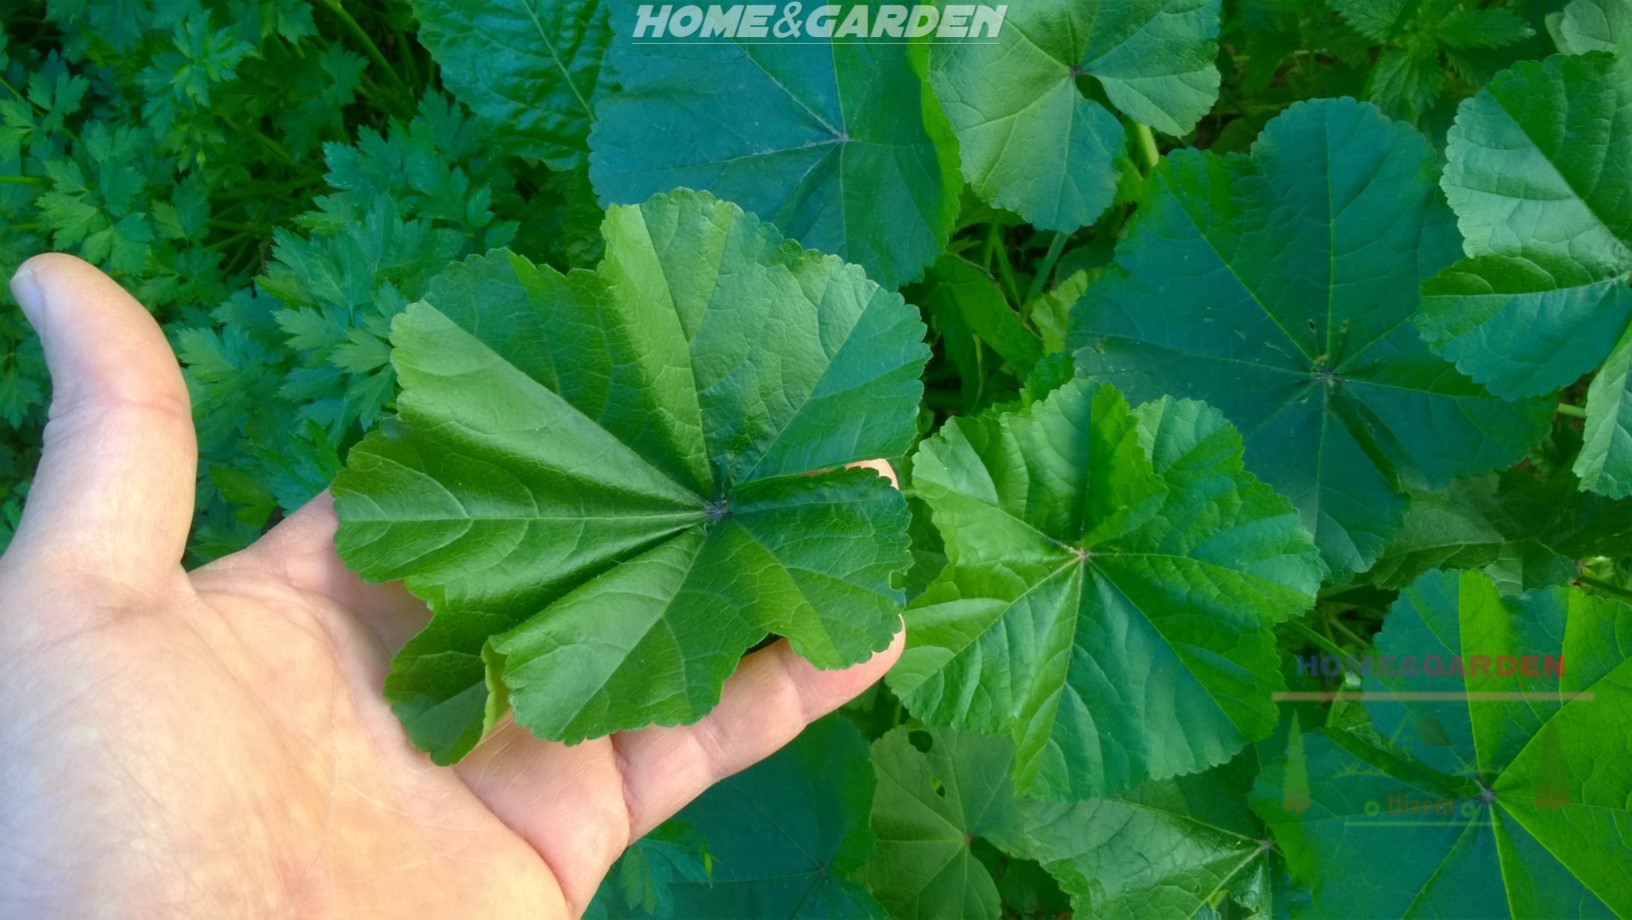 This amazing plant was used to treat many conditions. Mallow has been used to cleanse the liver, to cure blood poisoning, and to treat many problems, such rheumatism, heartburn, and coughs.